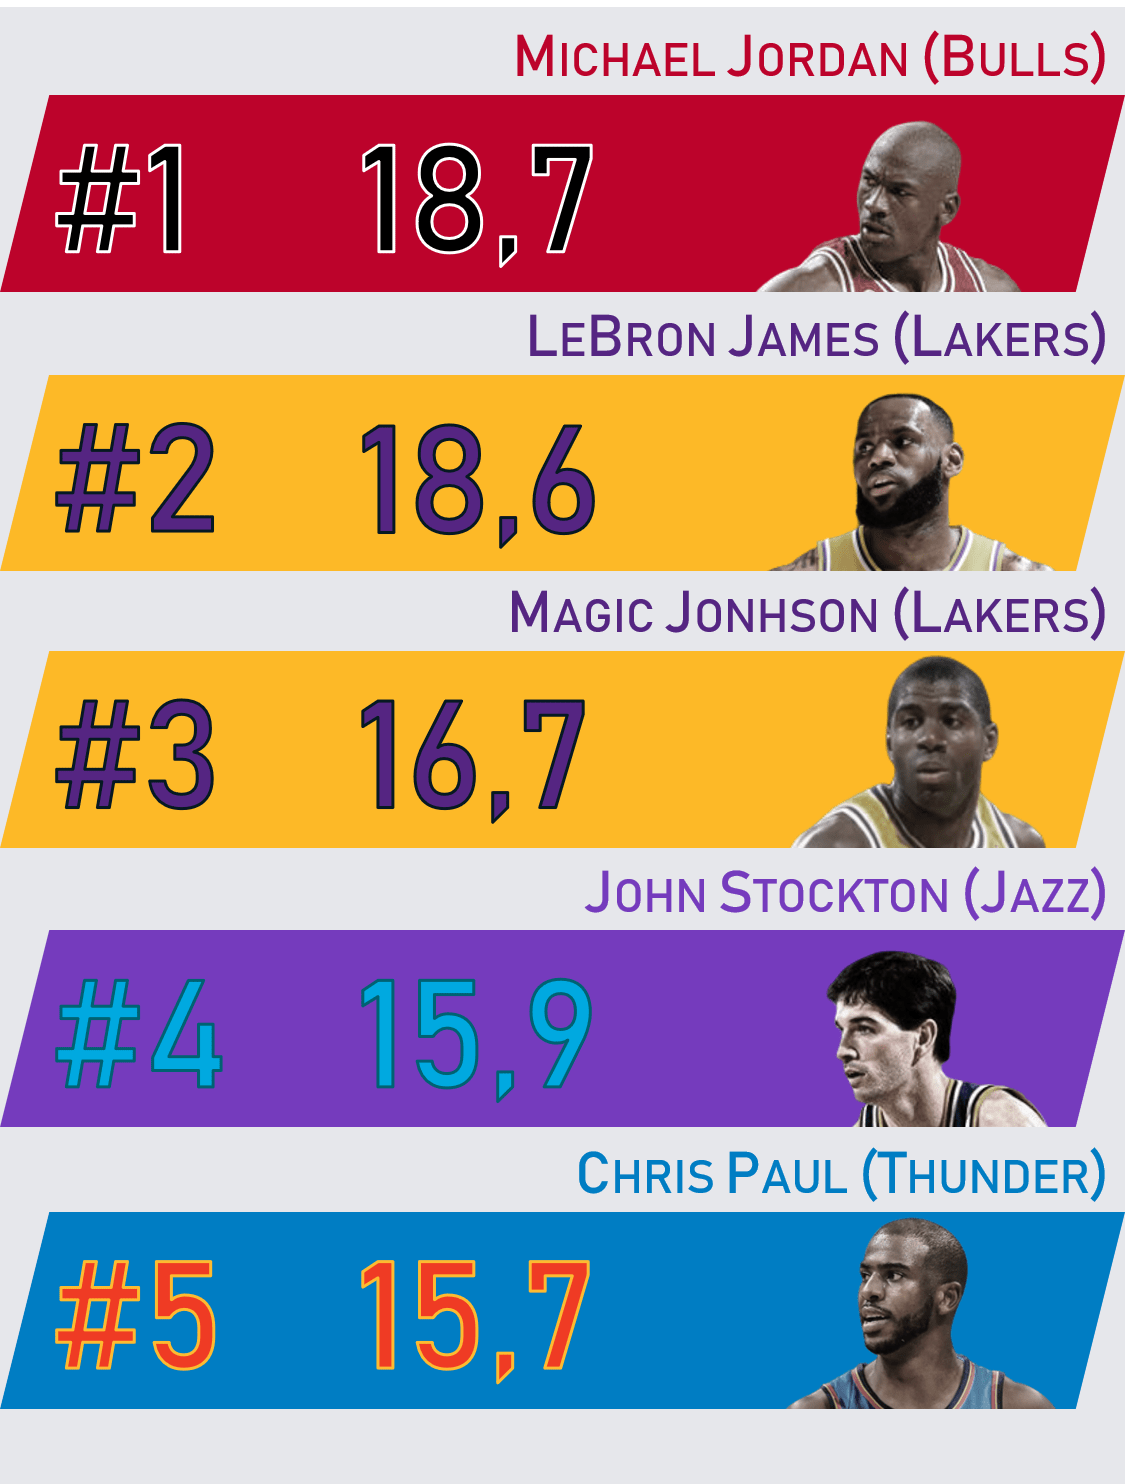 Best 5 players (with either their current or most prominent team) of NBA based on career means